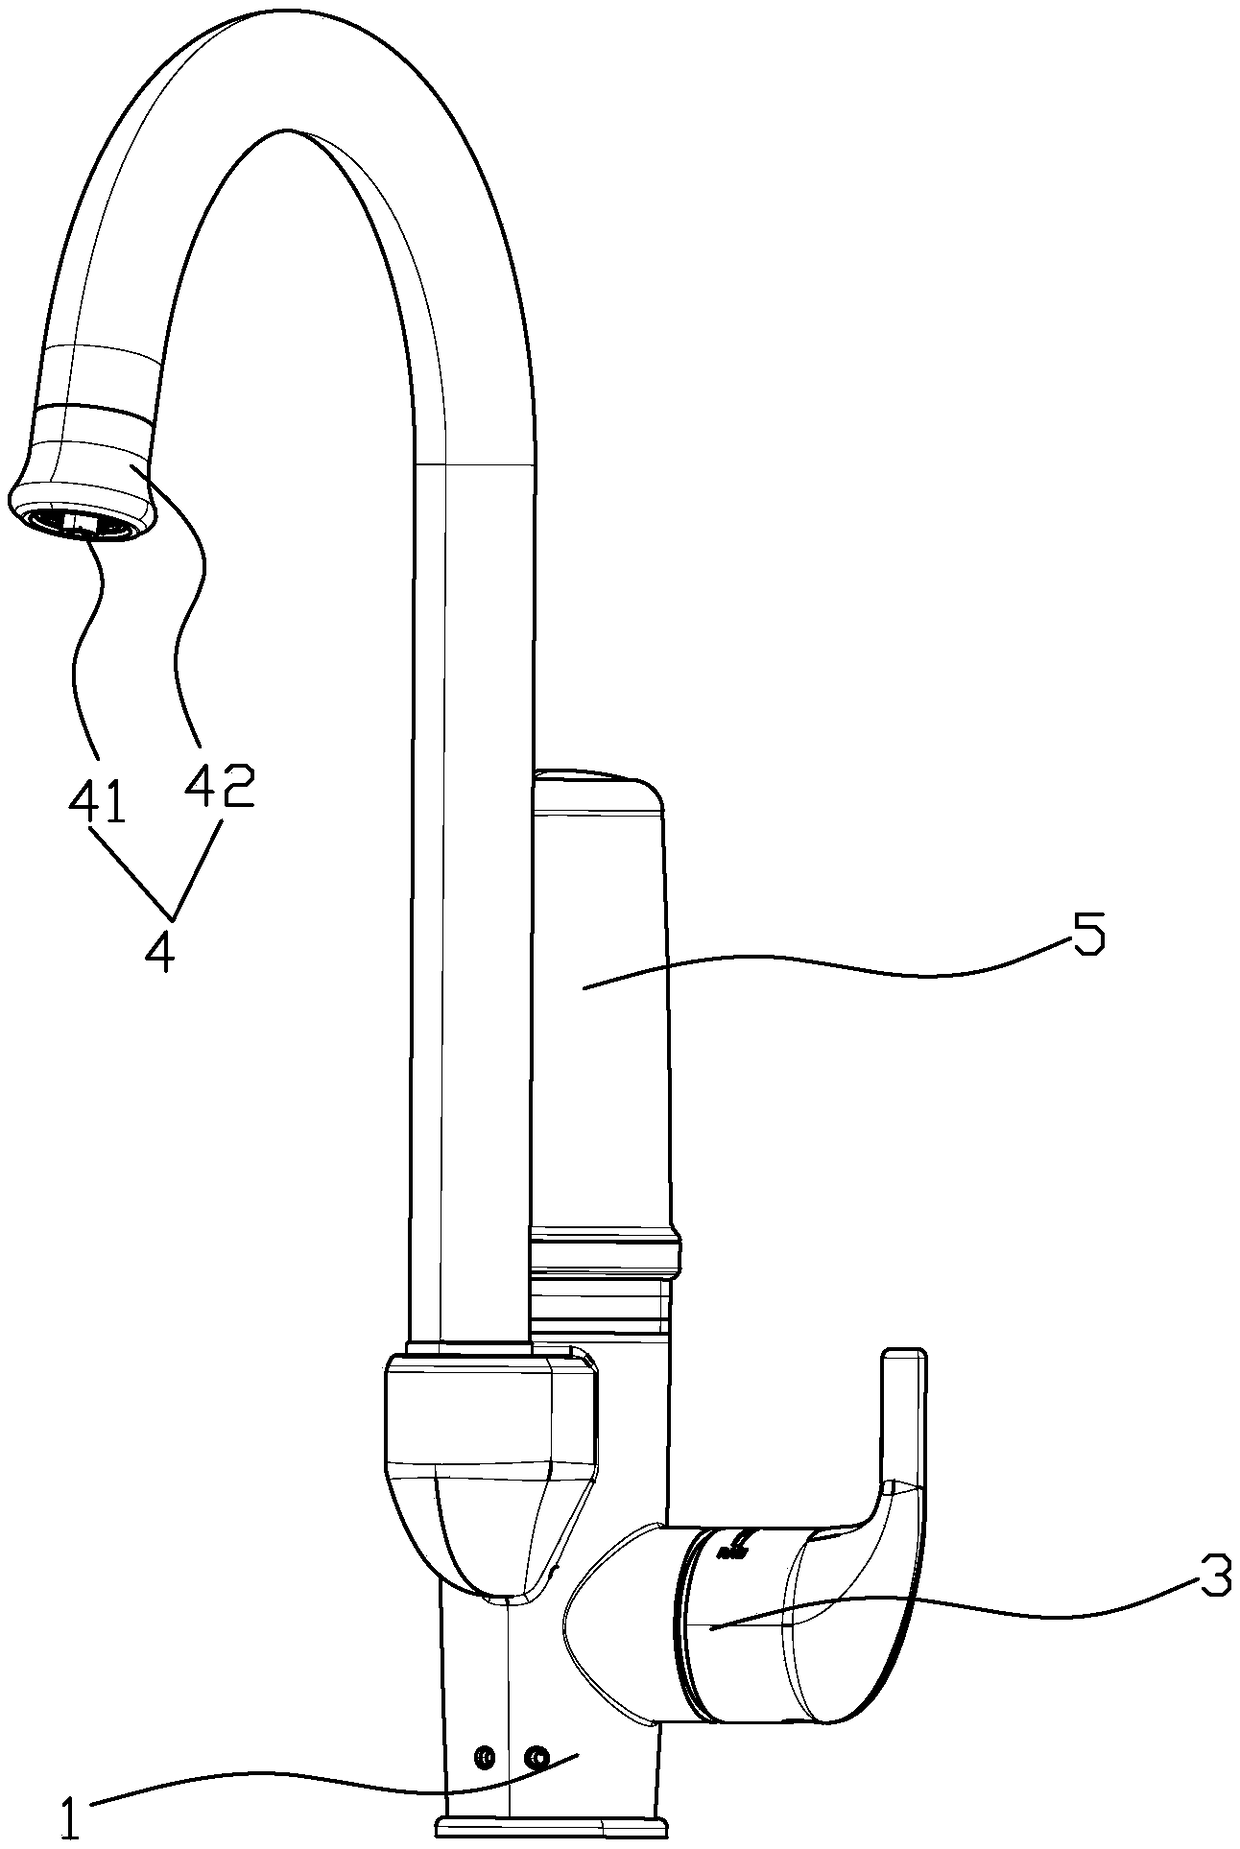 Water treatment faucet